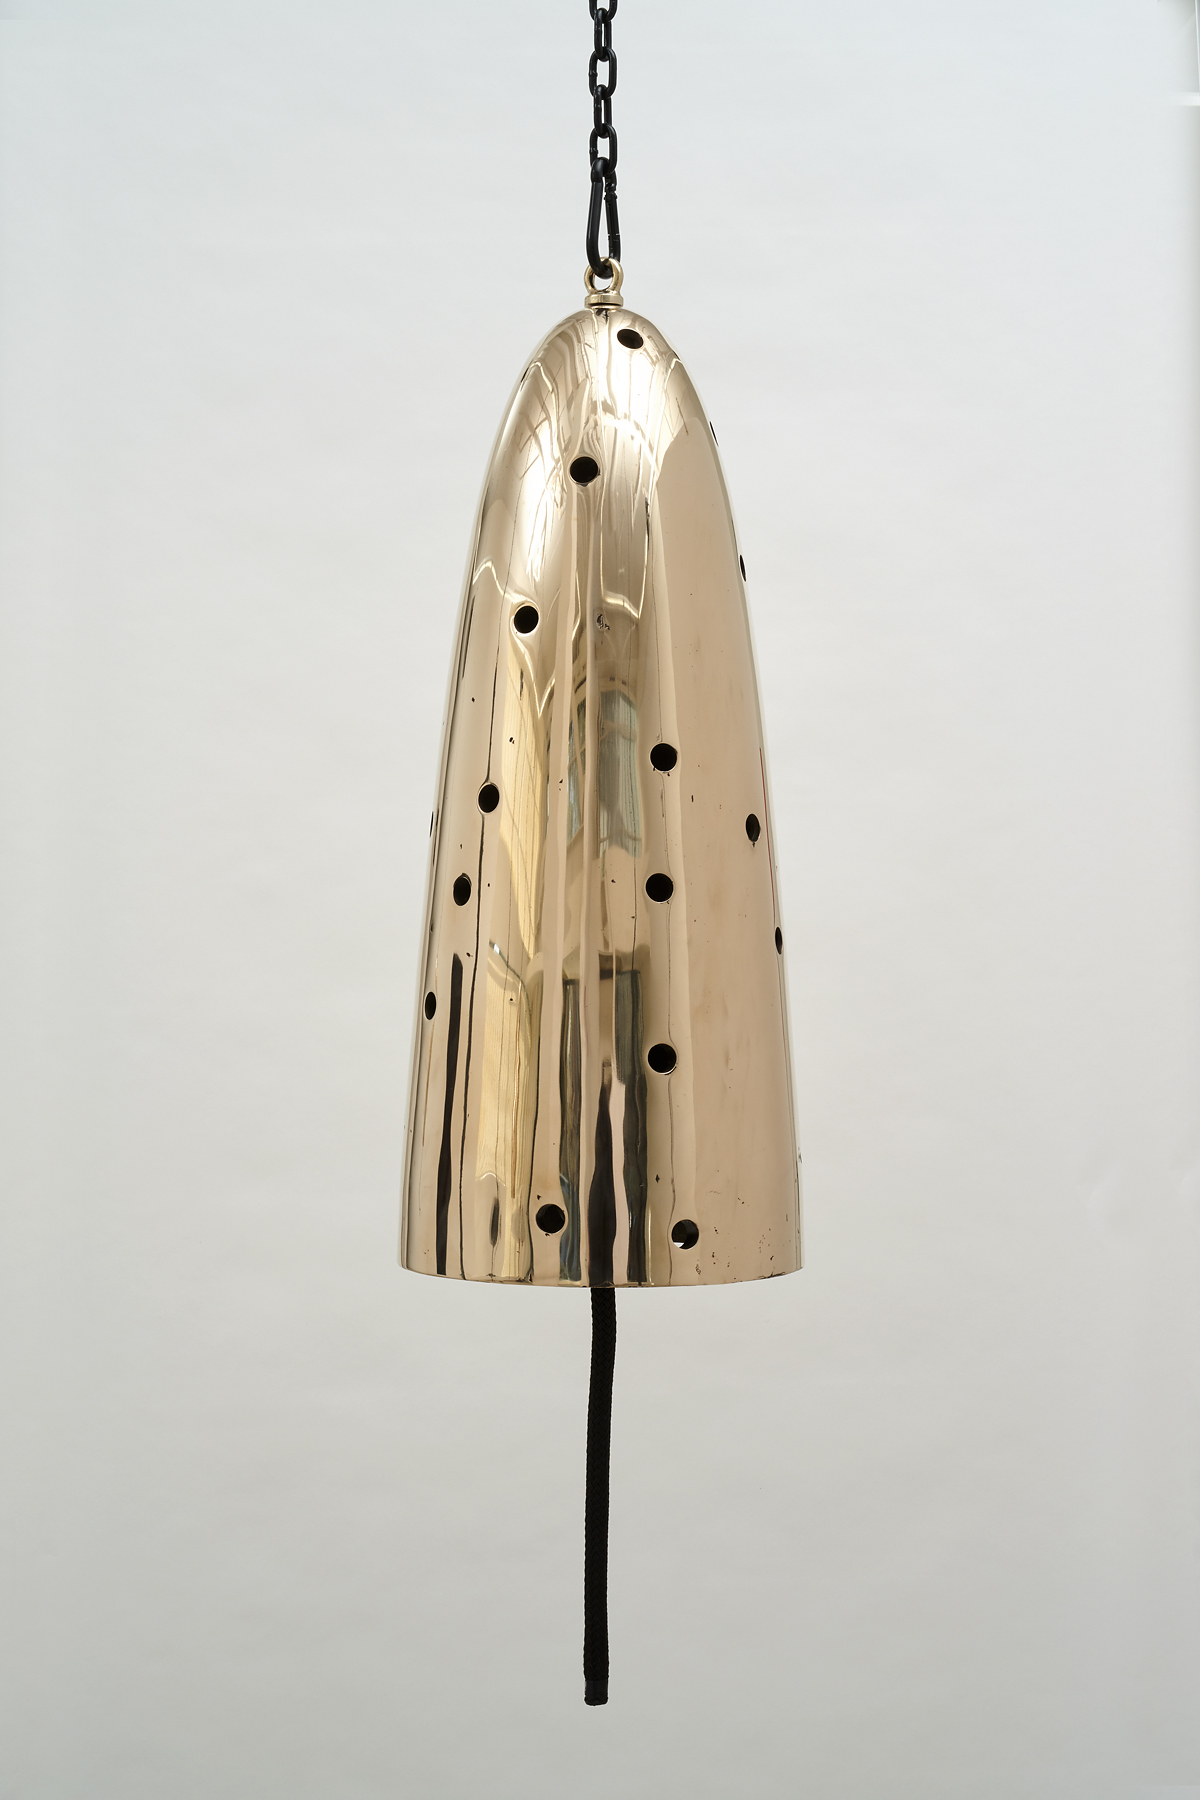  Davina Semo,  Vibrator , 2019, Polished and patinated cast bronze bell, whipped., nylon line, wooden clapper, powder-coated chain, hardware, Bell: 32 inches tall x 13 inches diameter / 81 cm tall x 33 cm diameter, overall dimensions variable 